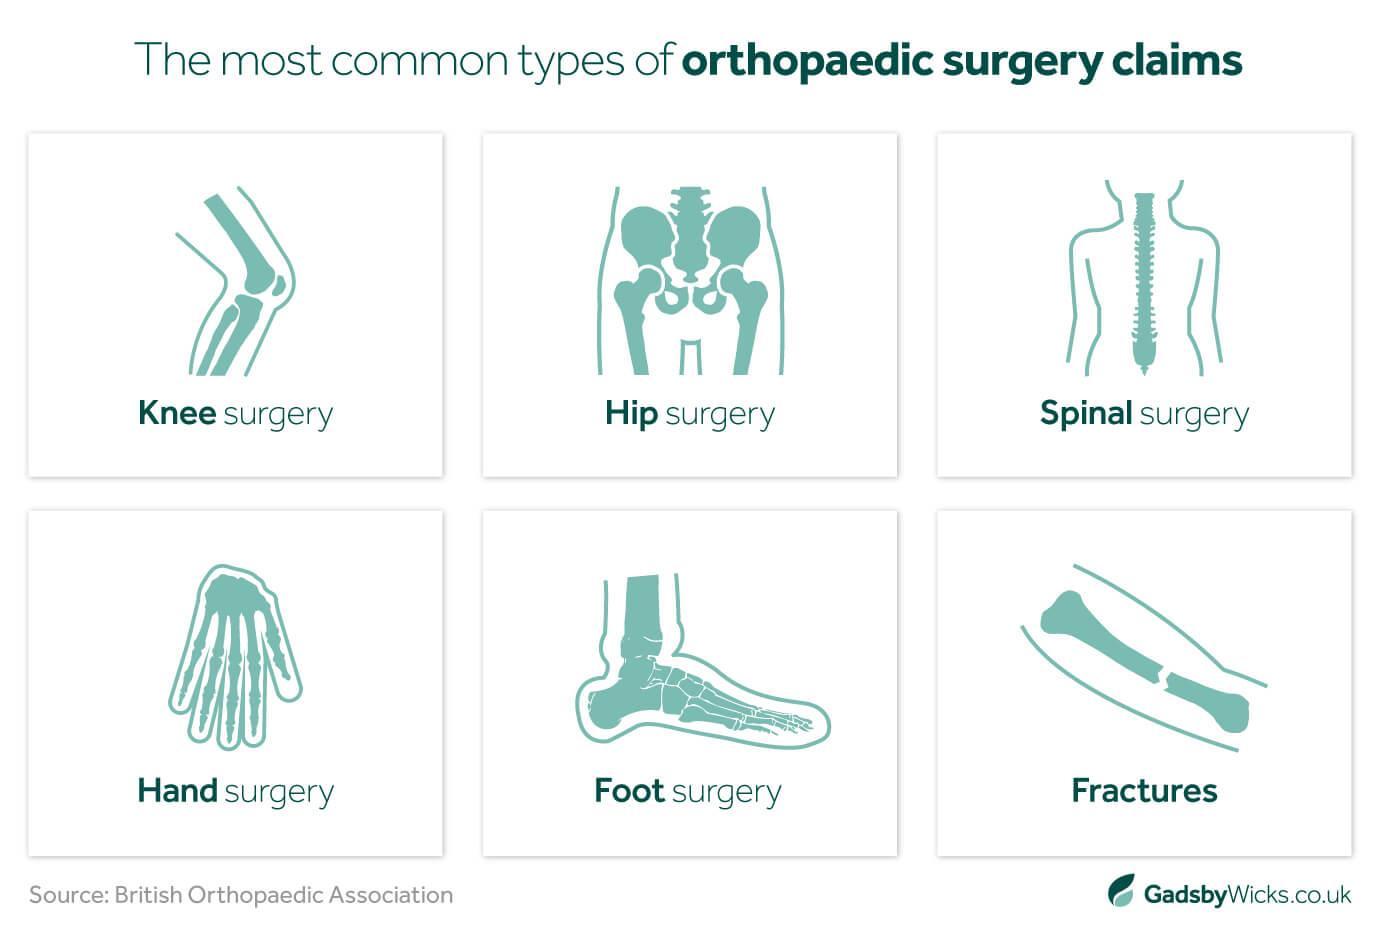 Infographic of most common types of orthopaedic surgery claims and injuries